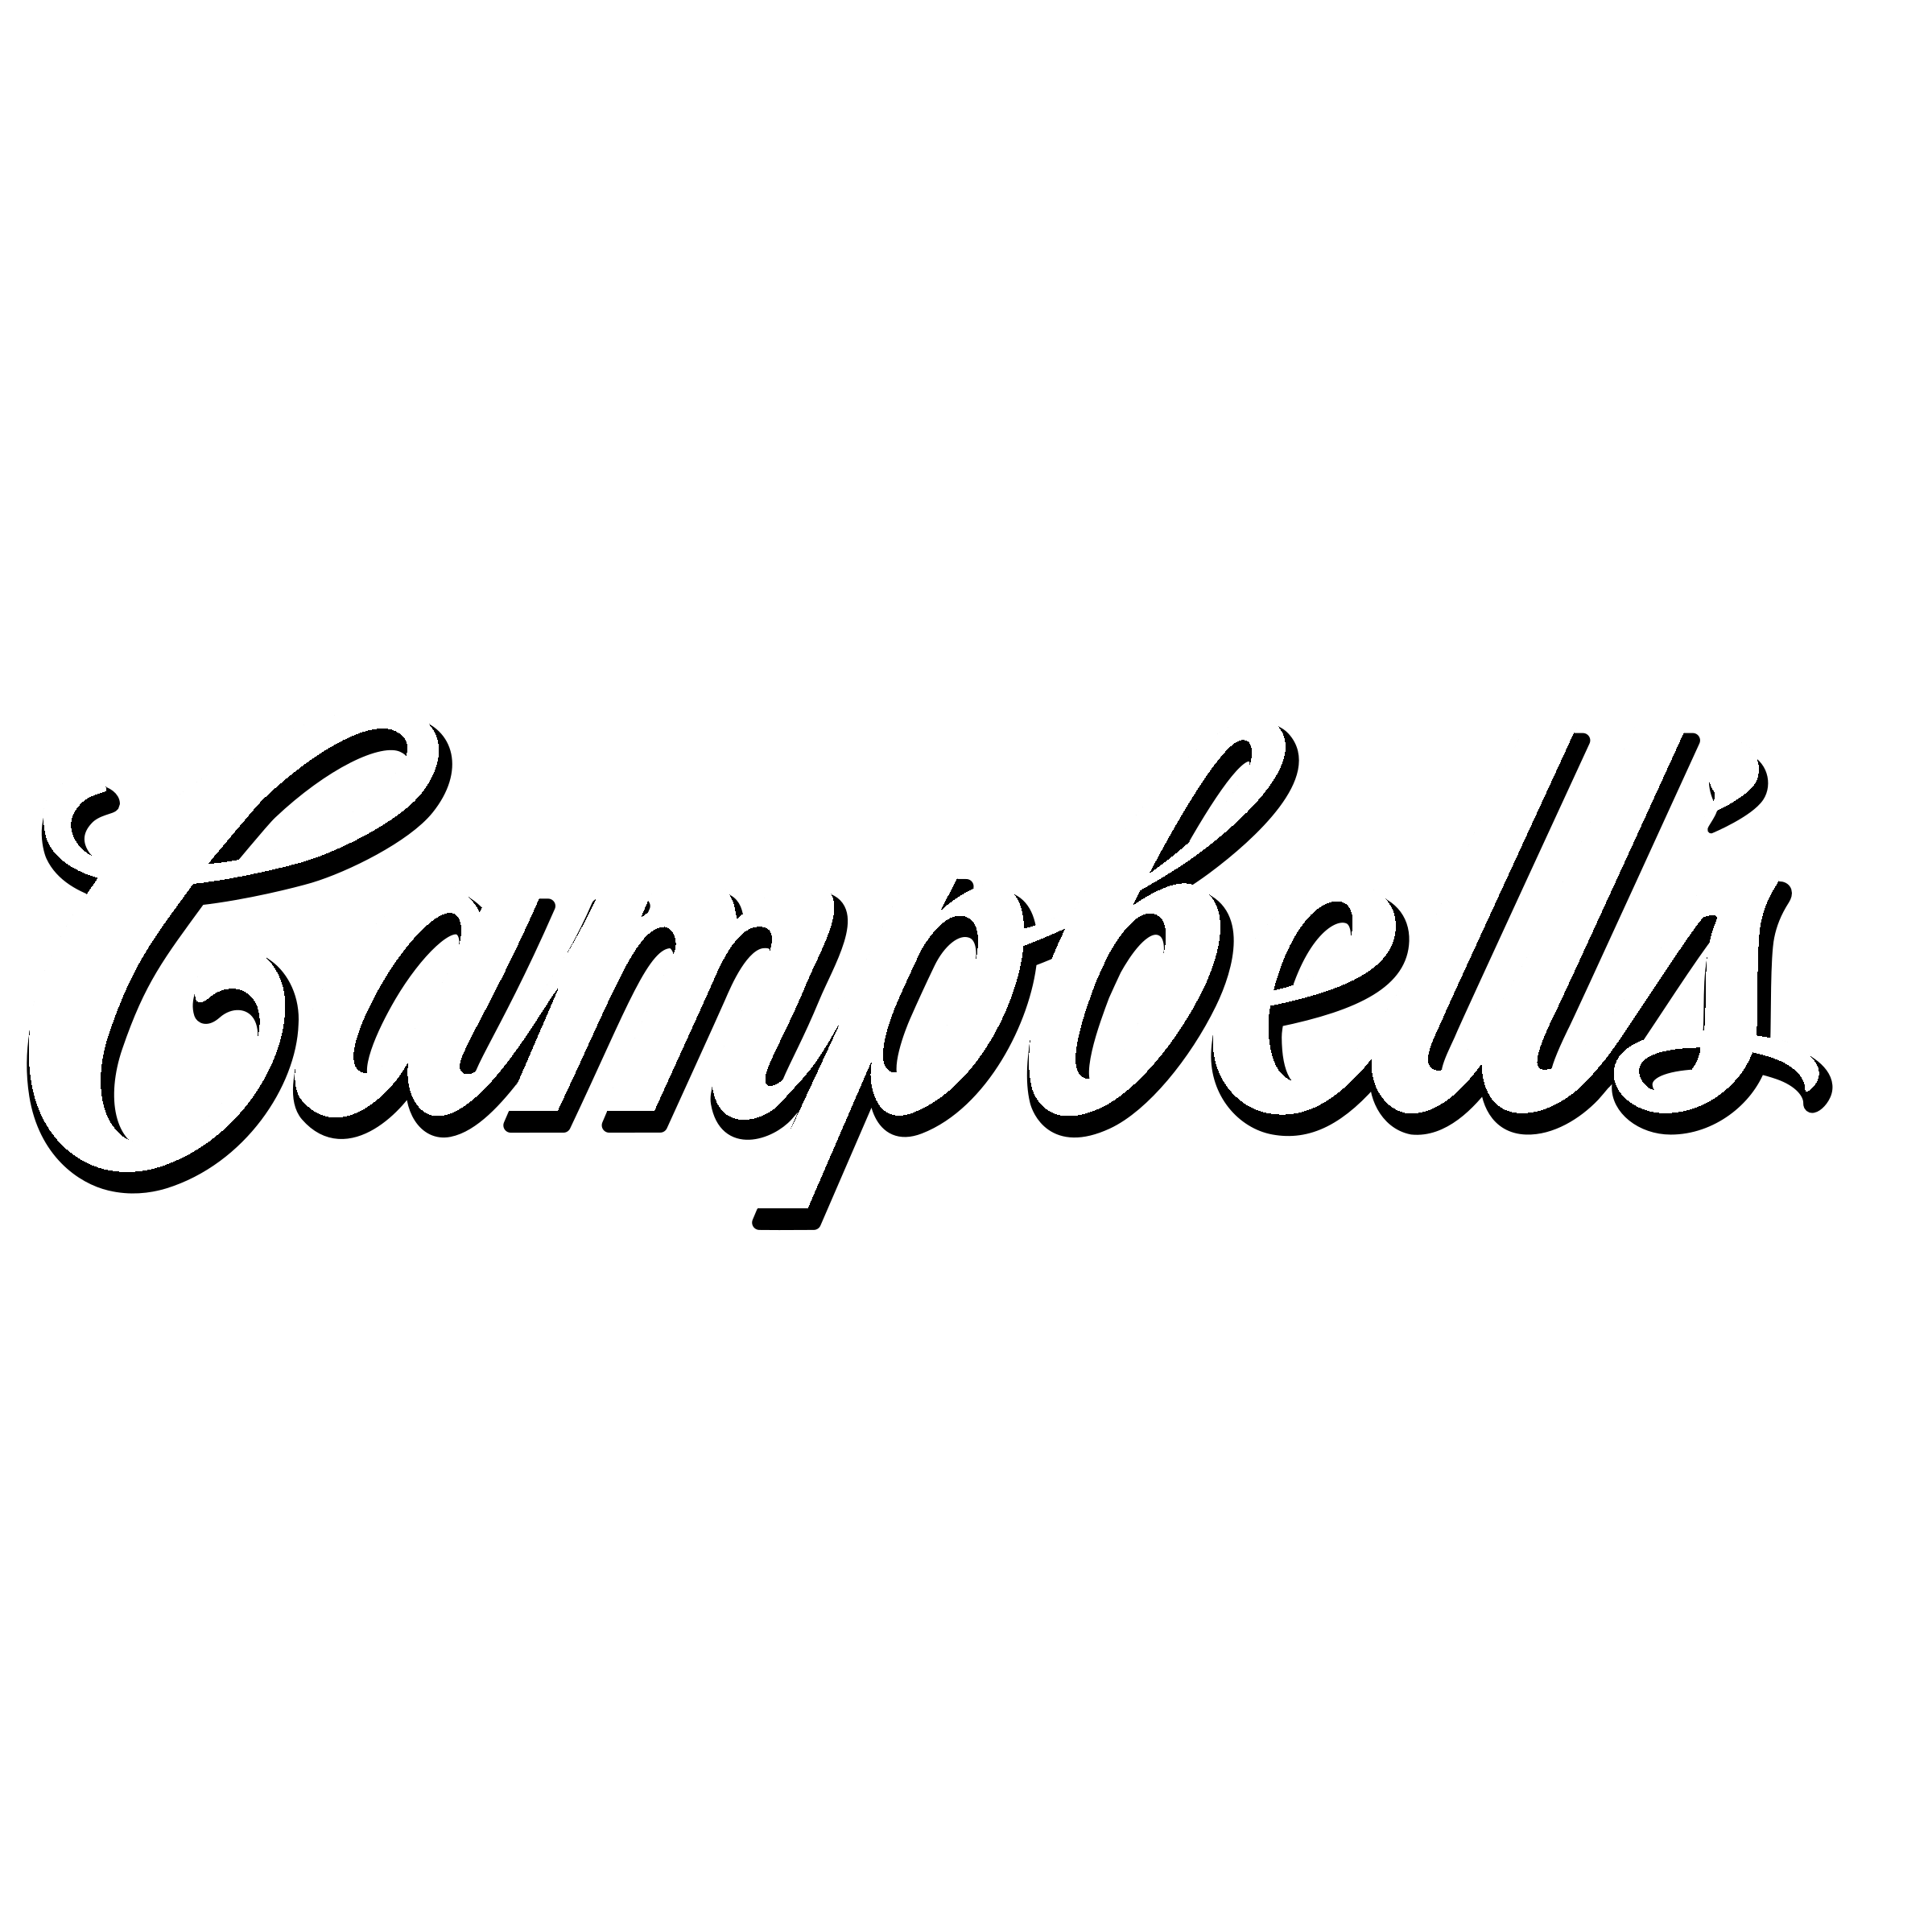 campbells-logo-black-and-white.png